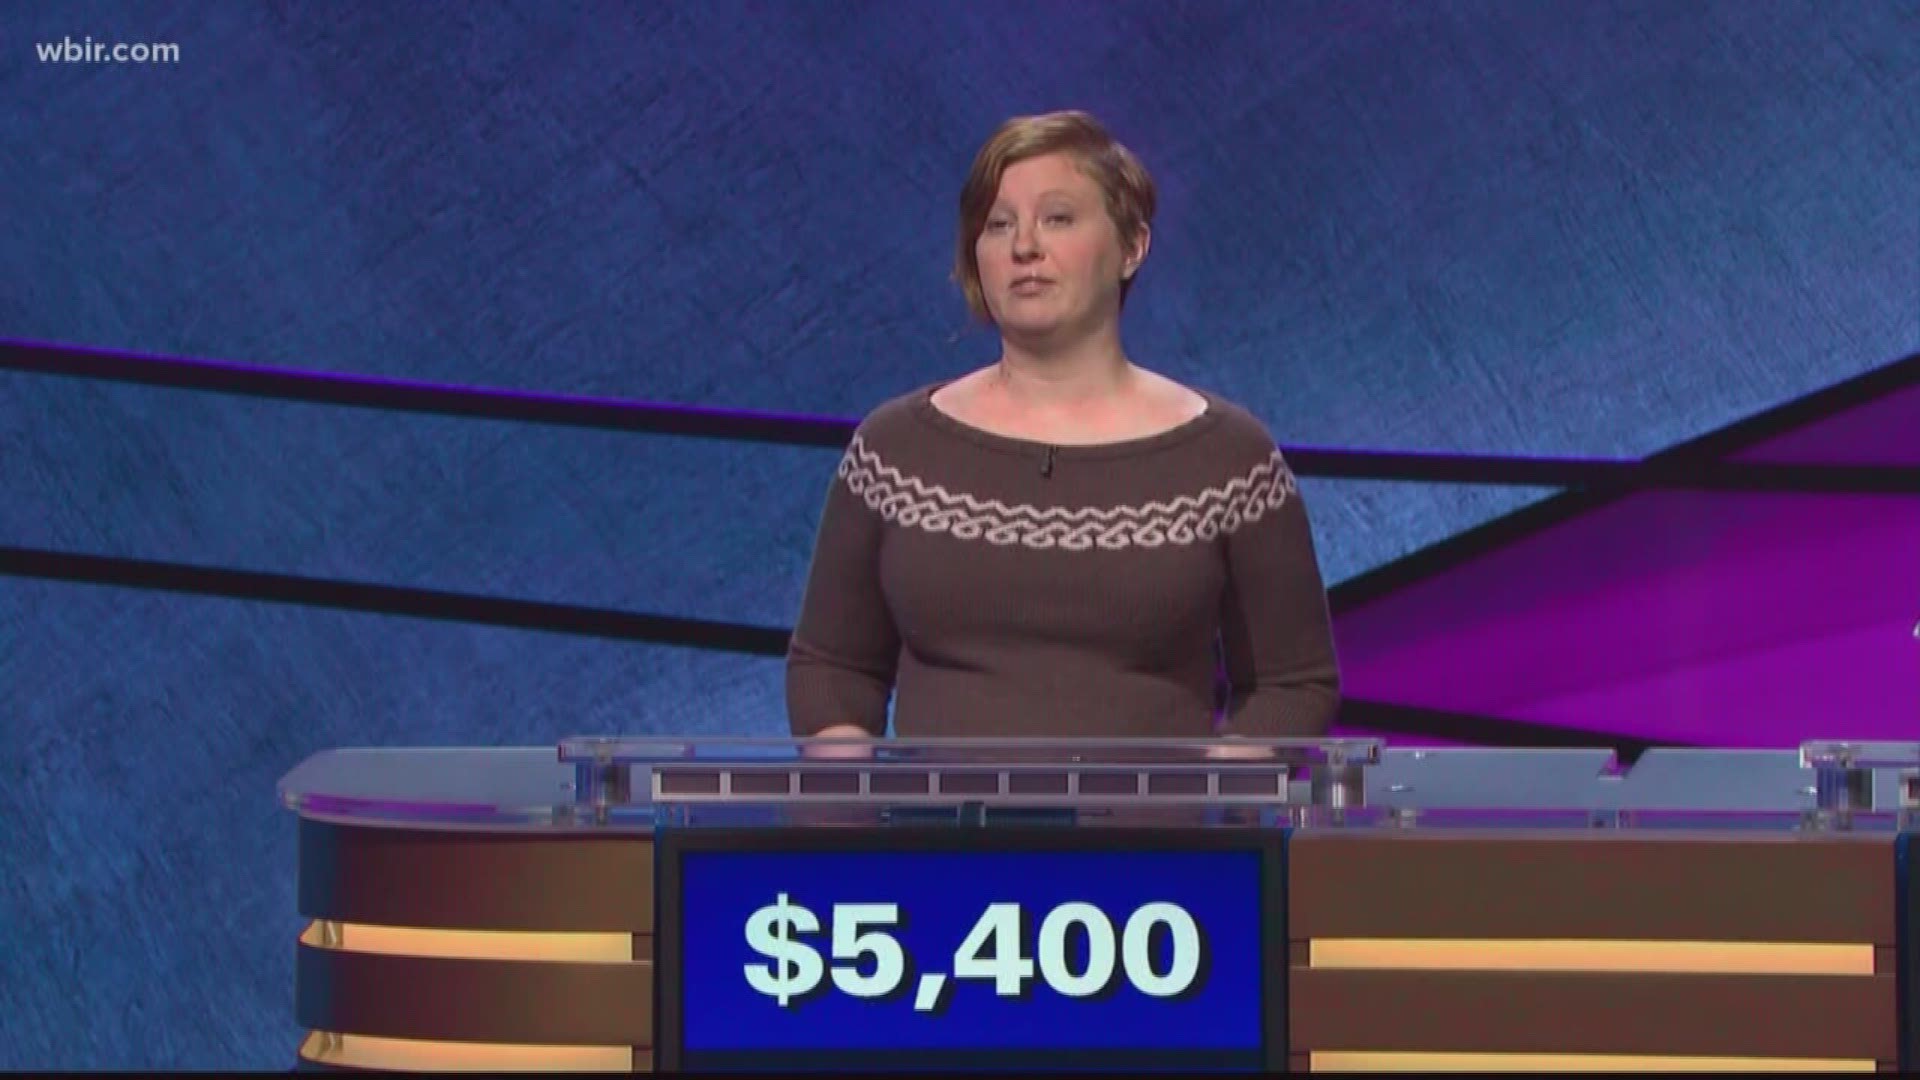 Oct. 13, 2017: Scarlett Sims won her first appearance on Jeopardy!, but missed the Final Jeopardy question in her second appearance.